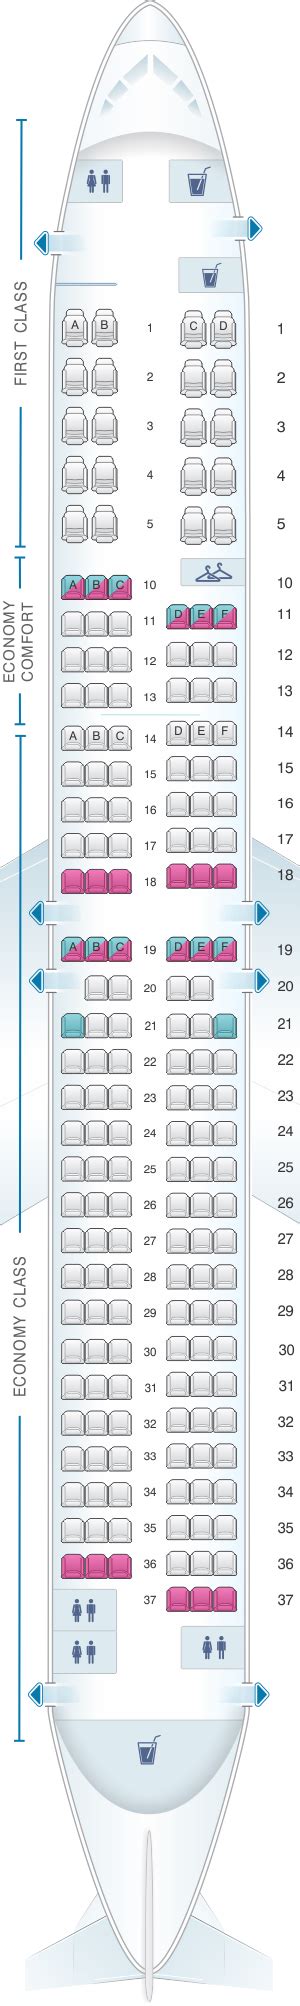 local_pizza. Seat 34F is a standard economy window seat with 30-31" of seat pitch, which is average across Boeing 737-900's worldwide.